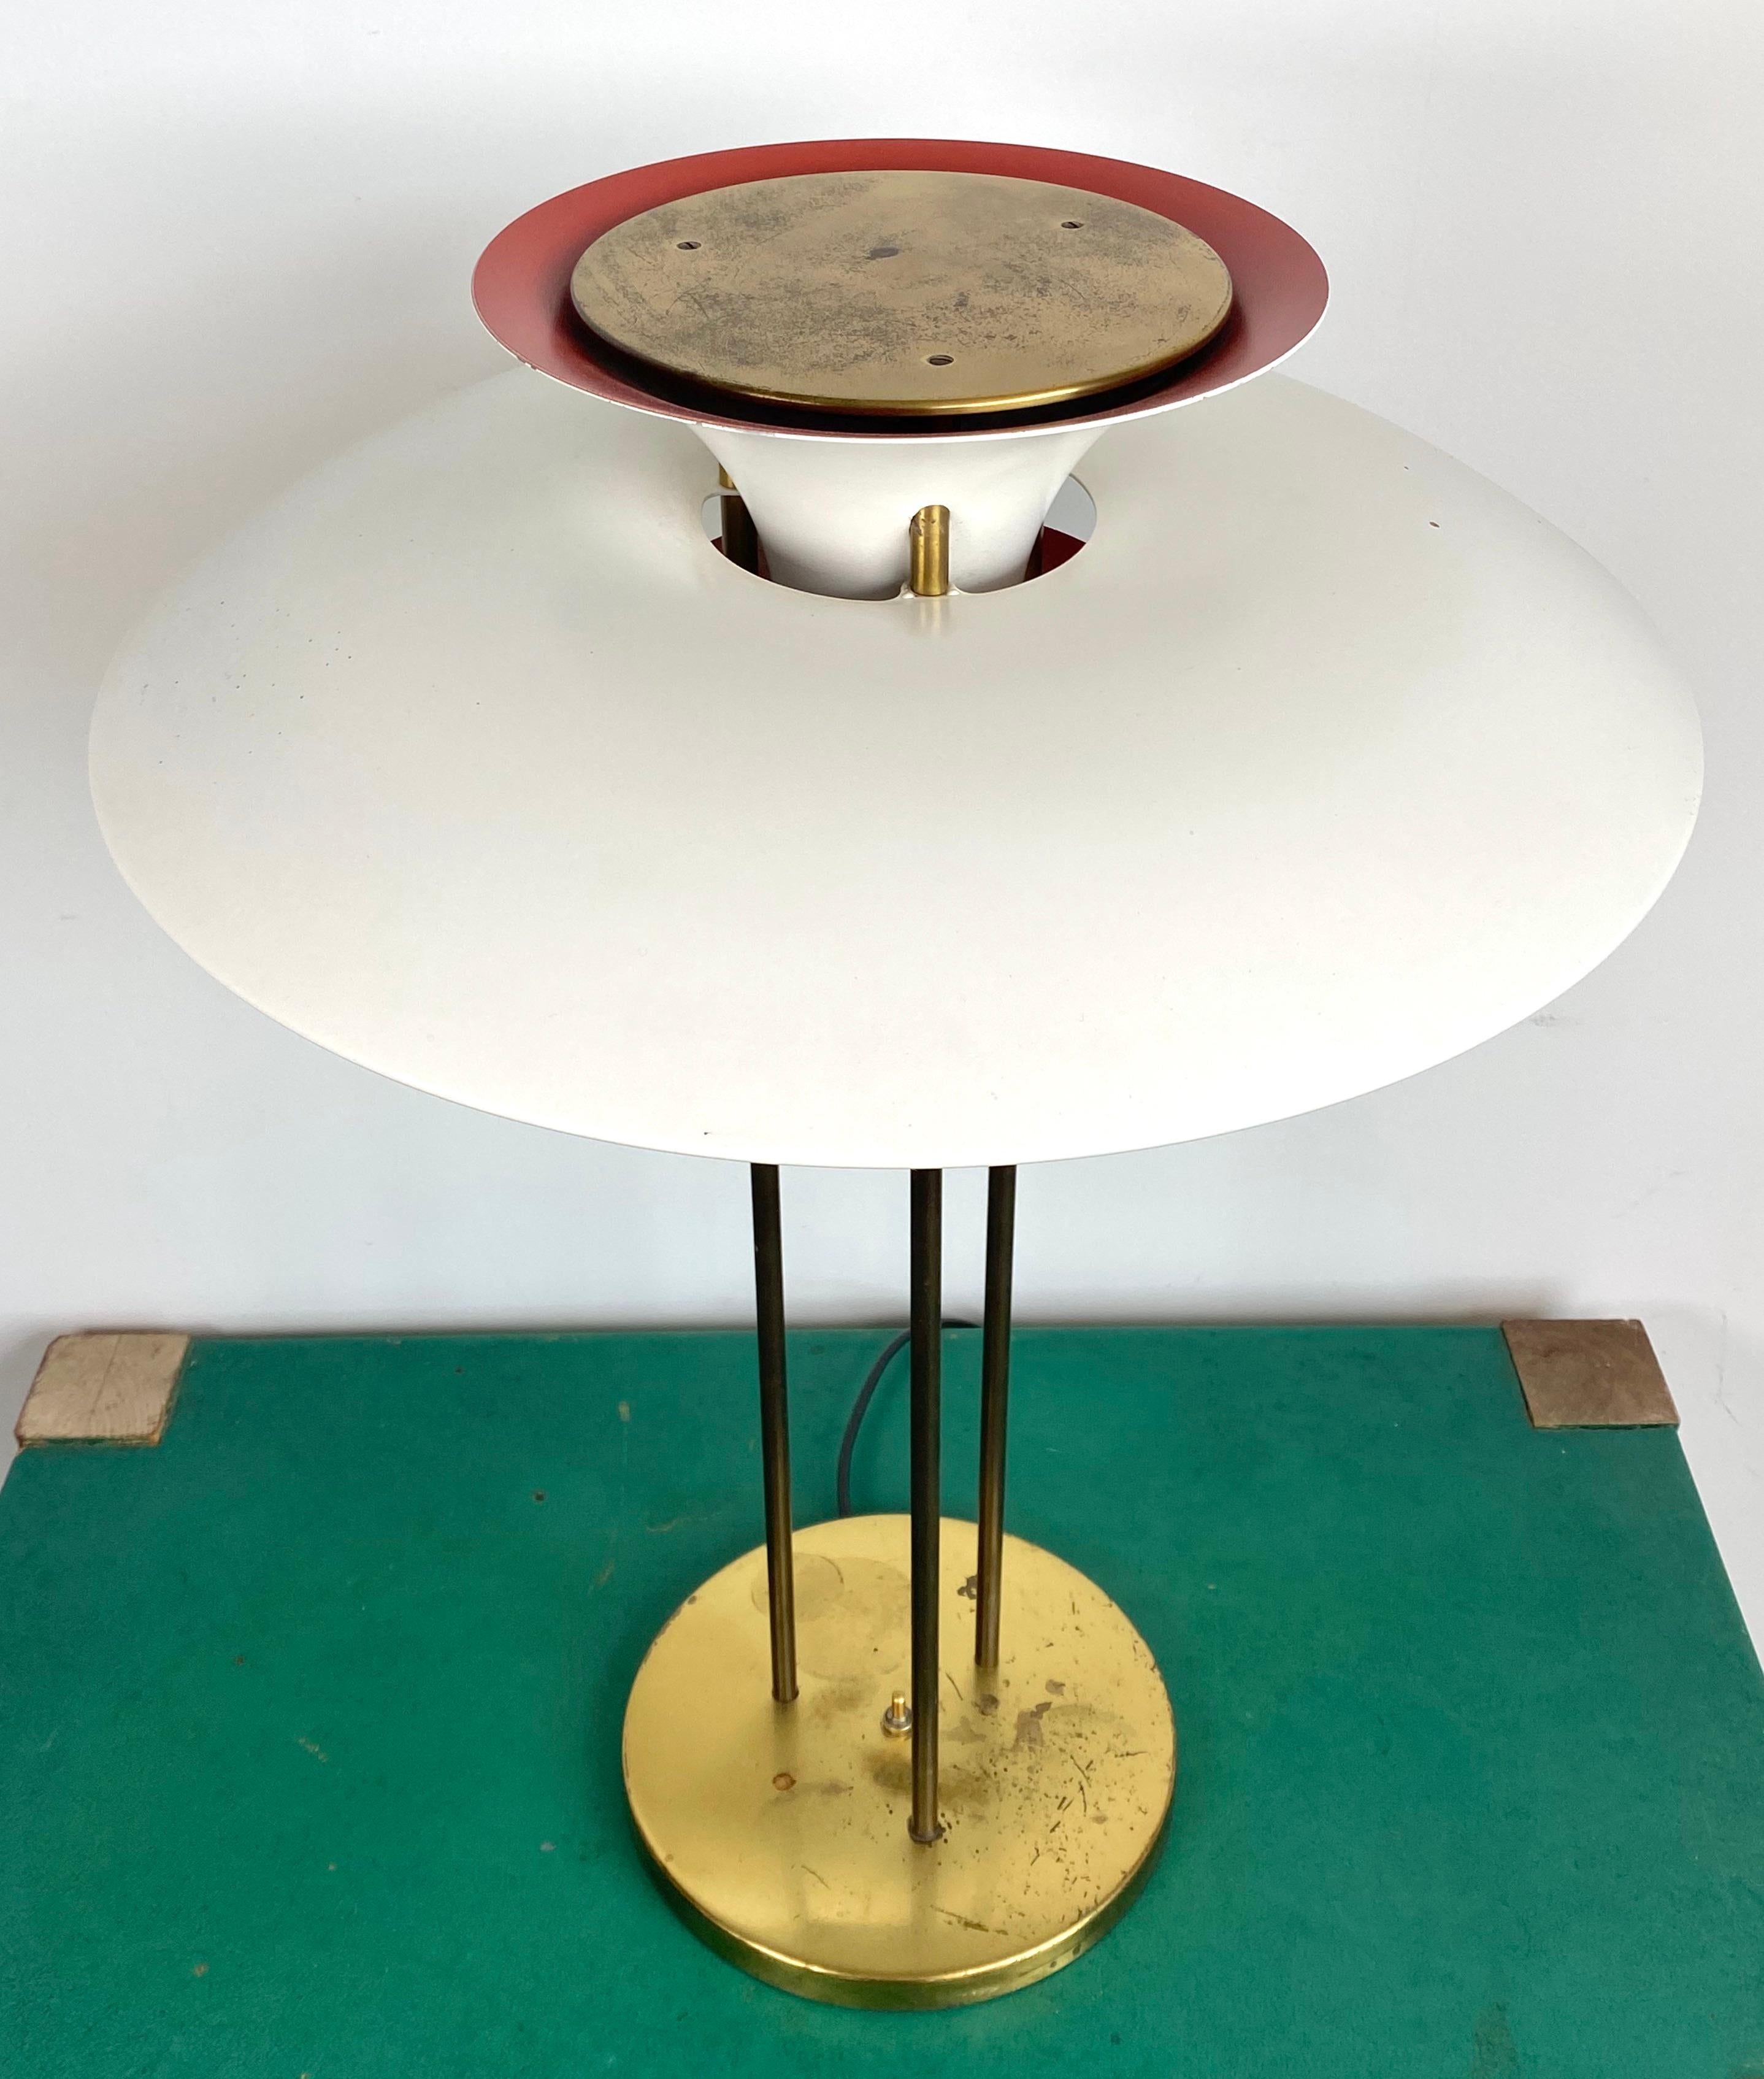 Machine-Made 1960s Out of Production PH 5 Table Lamp  by Poul Henningsen for Louis Poulsen